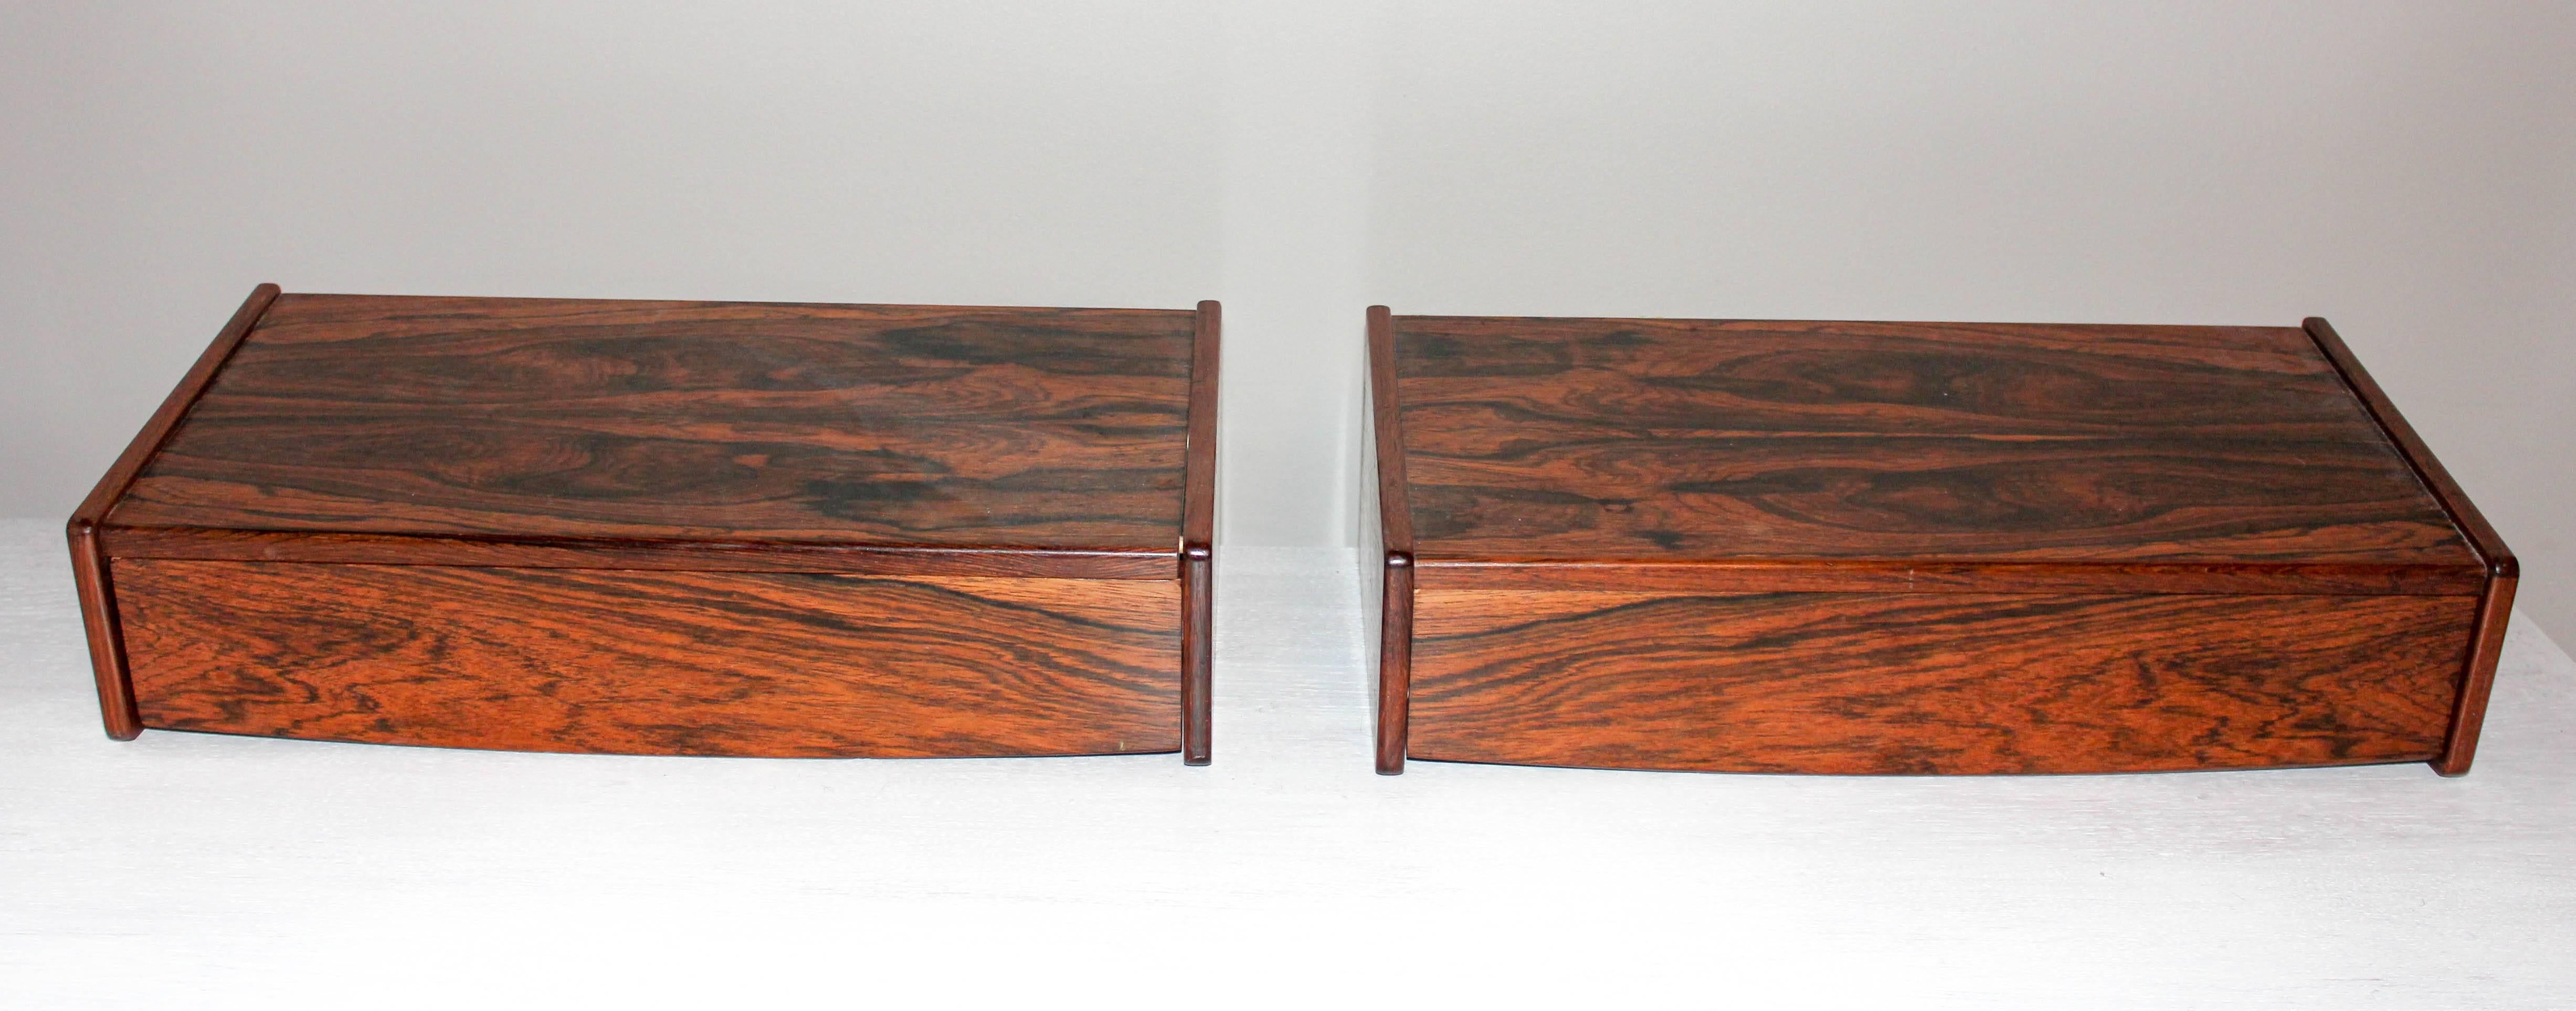 This pair of rosewood nightstands are made by unknown design designer and are made for bedroom interior. These high quality pieces in minimalistic design are mounted directly on the wall. The rosewood has very nice grain and both stands are in very